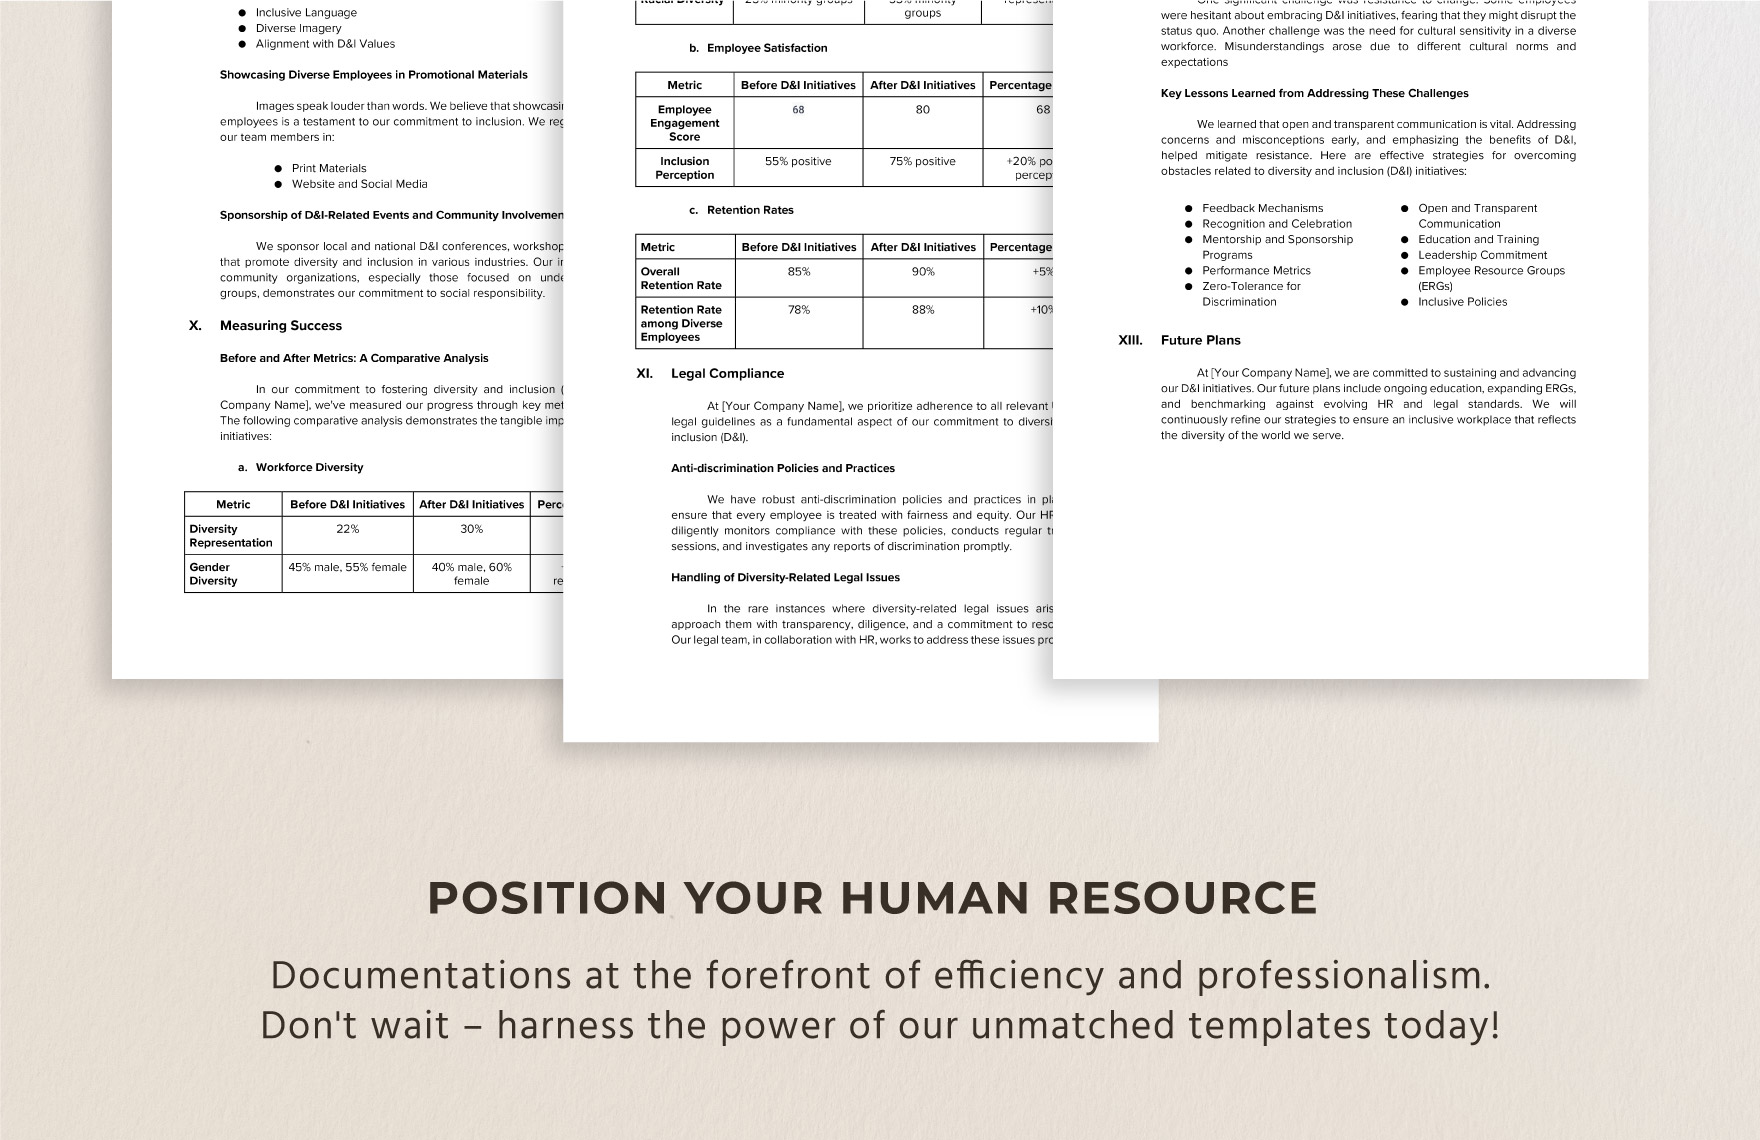 Diverse and Inclusive Branding Case Study HR Template